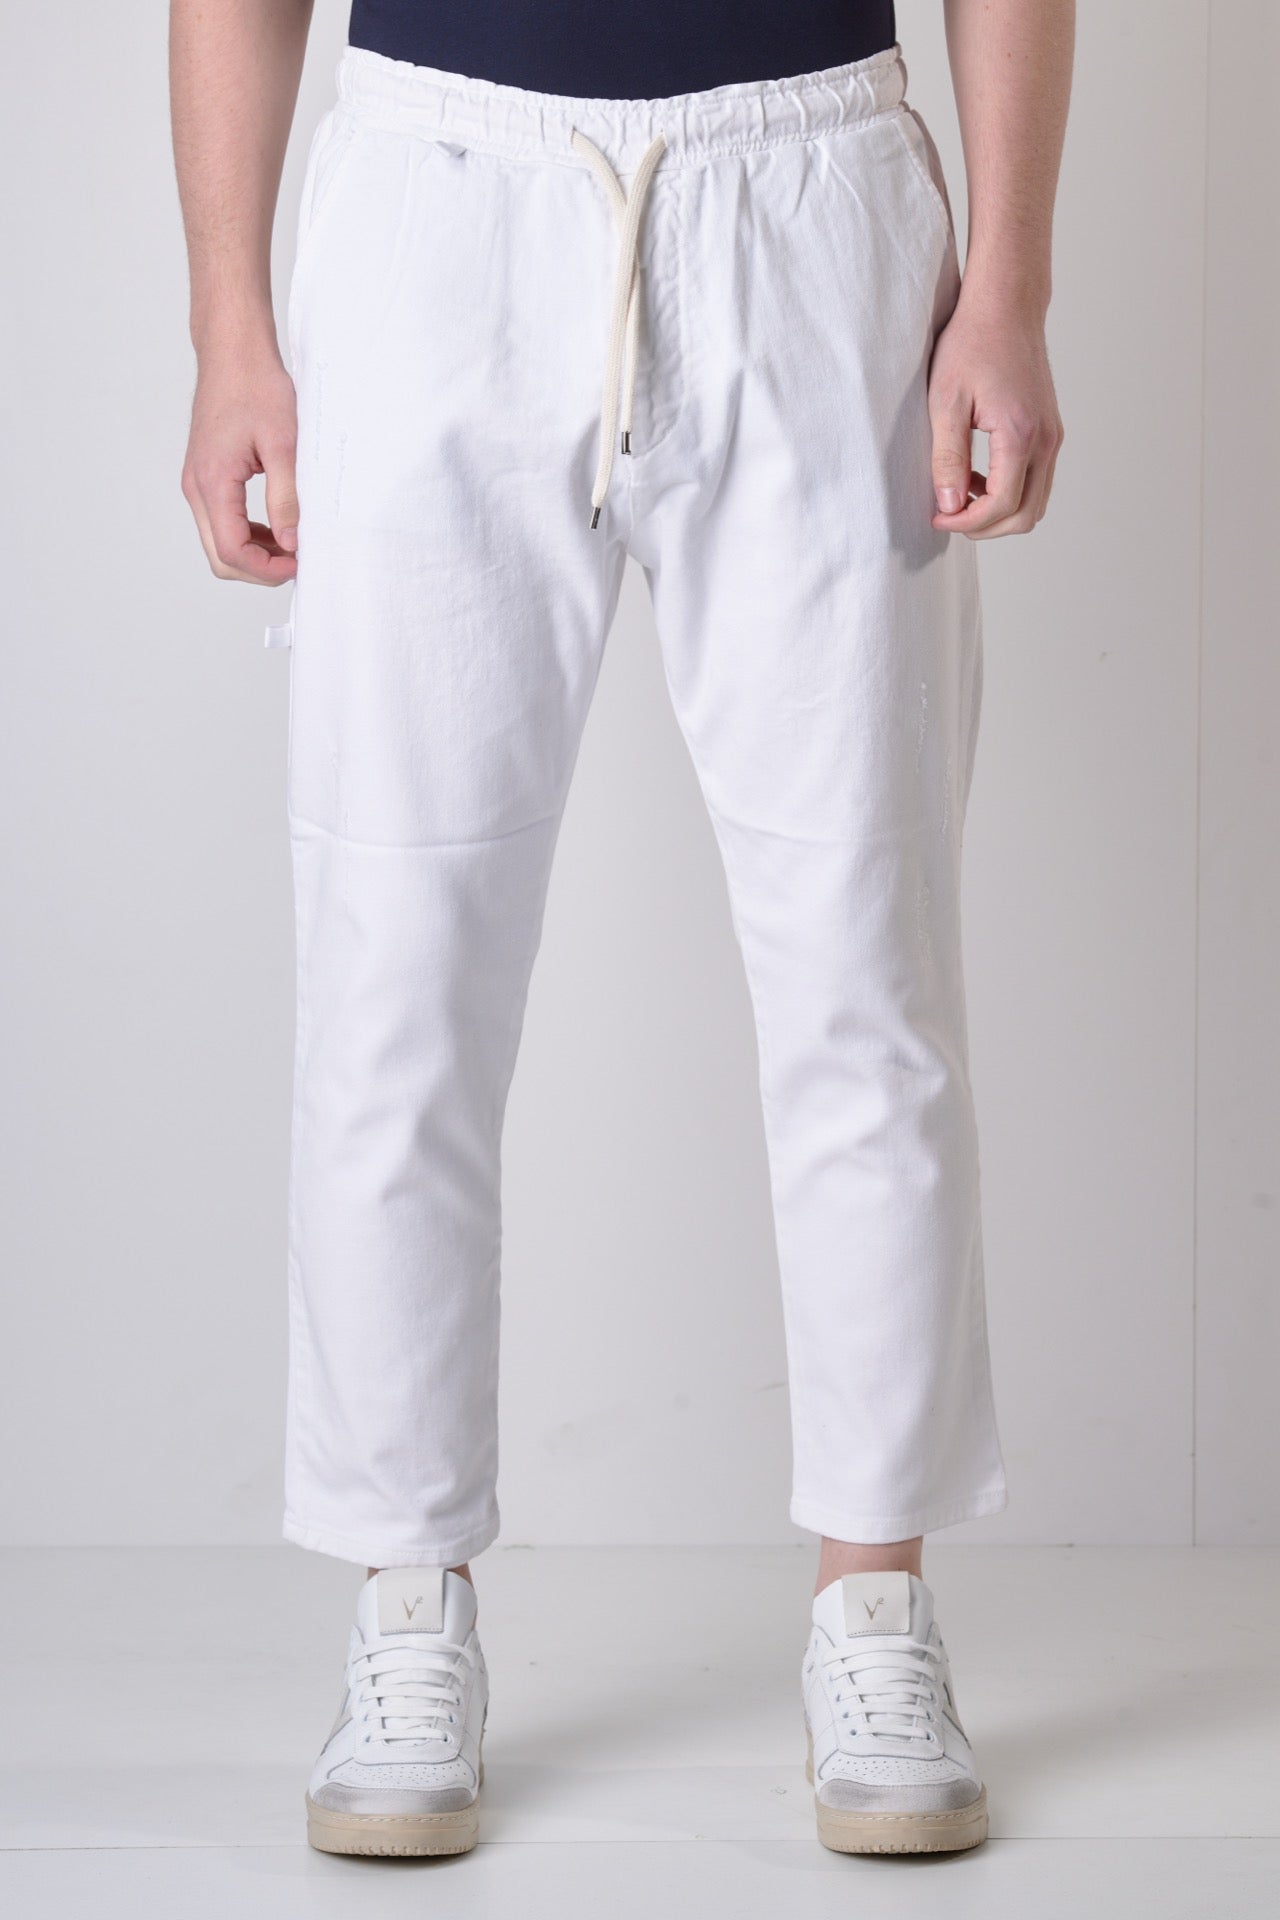 ALICANTE - White Drill trousers with elastic